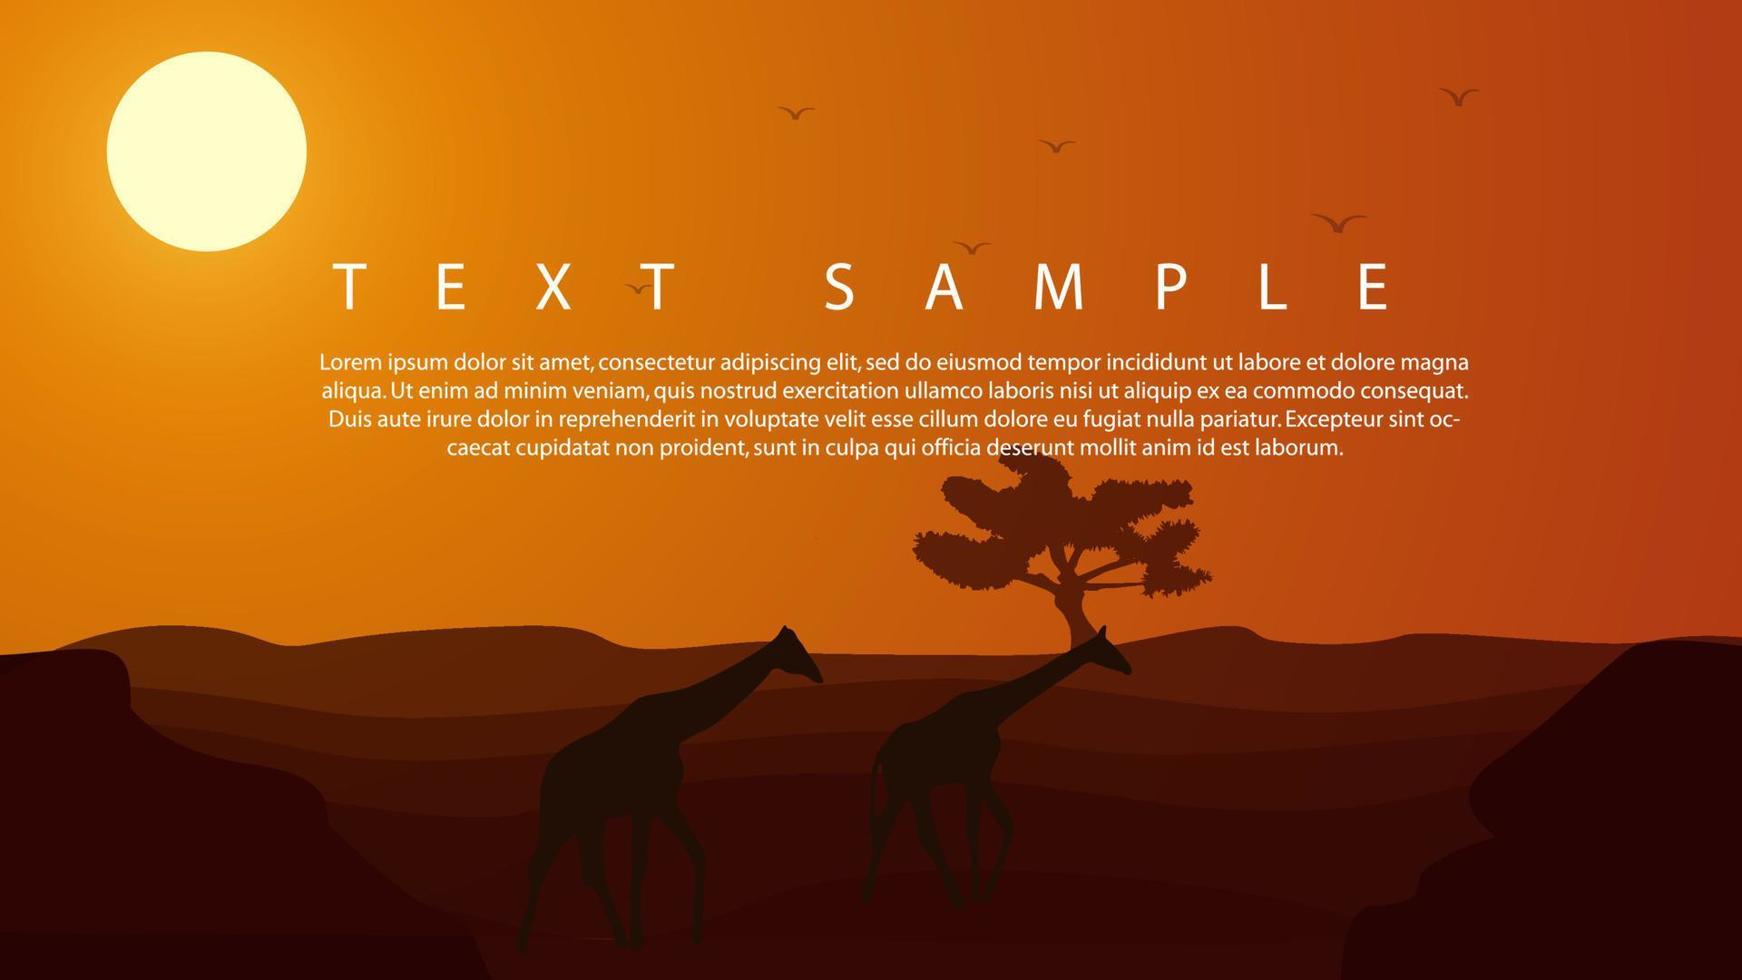 Africa desert nature landscape with animals silhouette vector